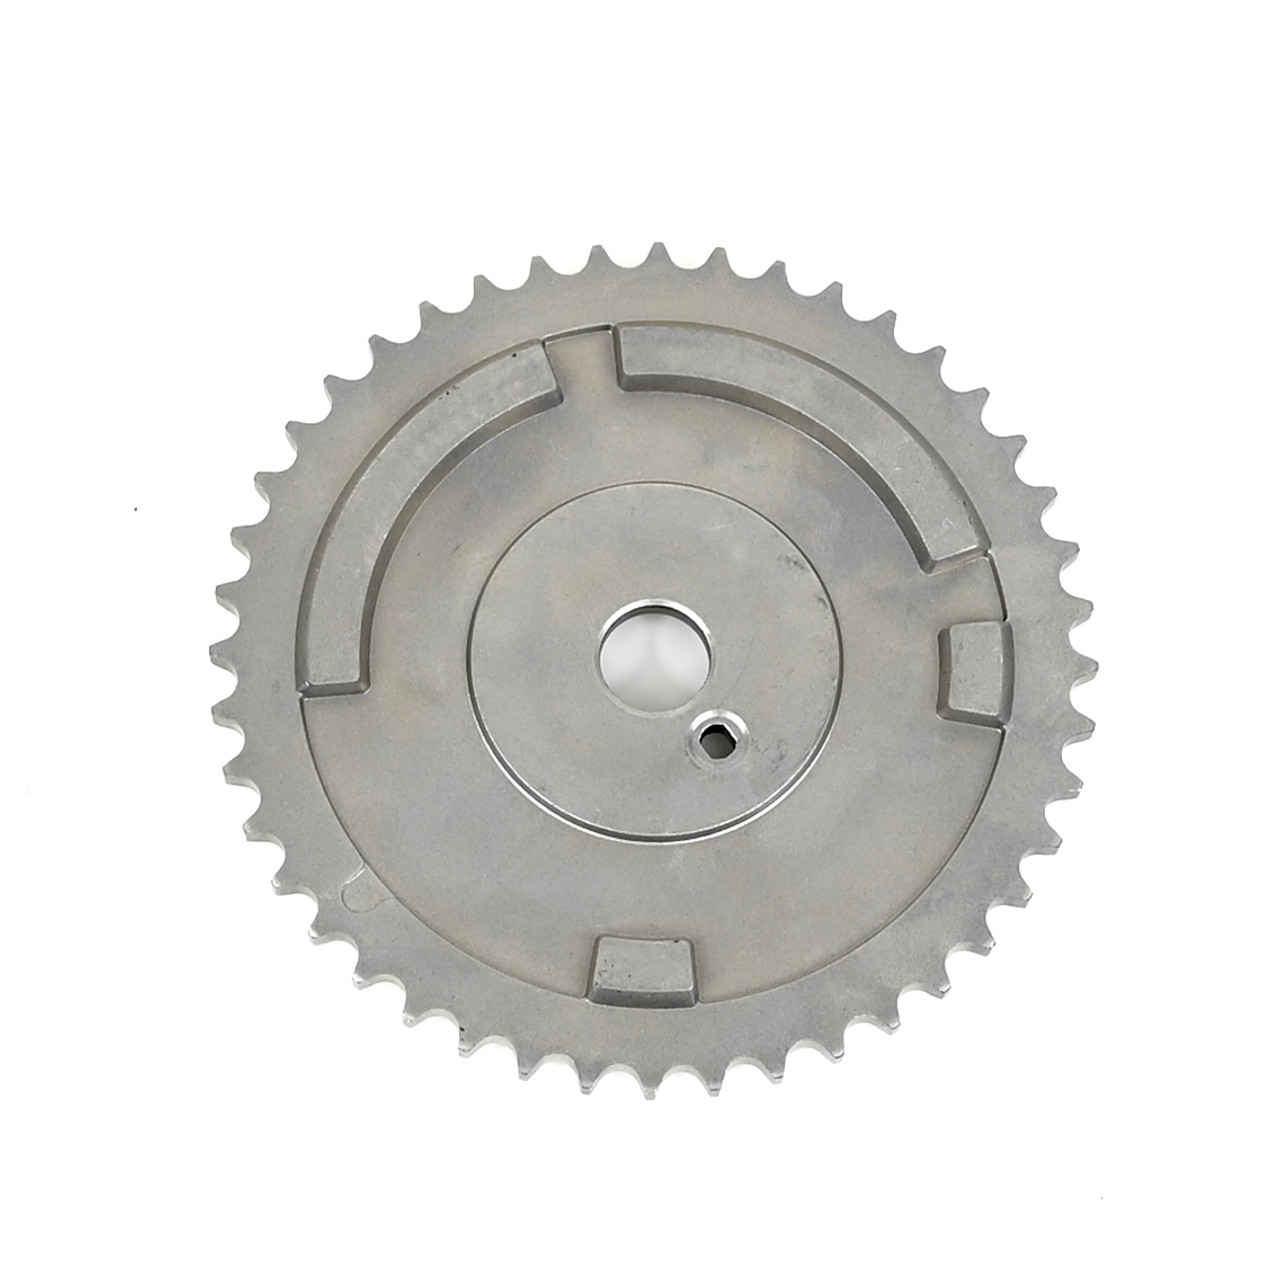 Single Bolt 4x Timing Cam Gear, Sprocket replaces LS3 12591689 1-Bolt for engines with 58 tooth crankshaft reluctor wheel